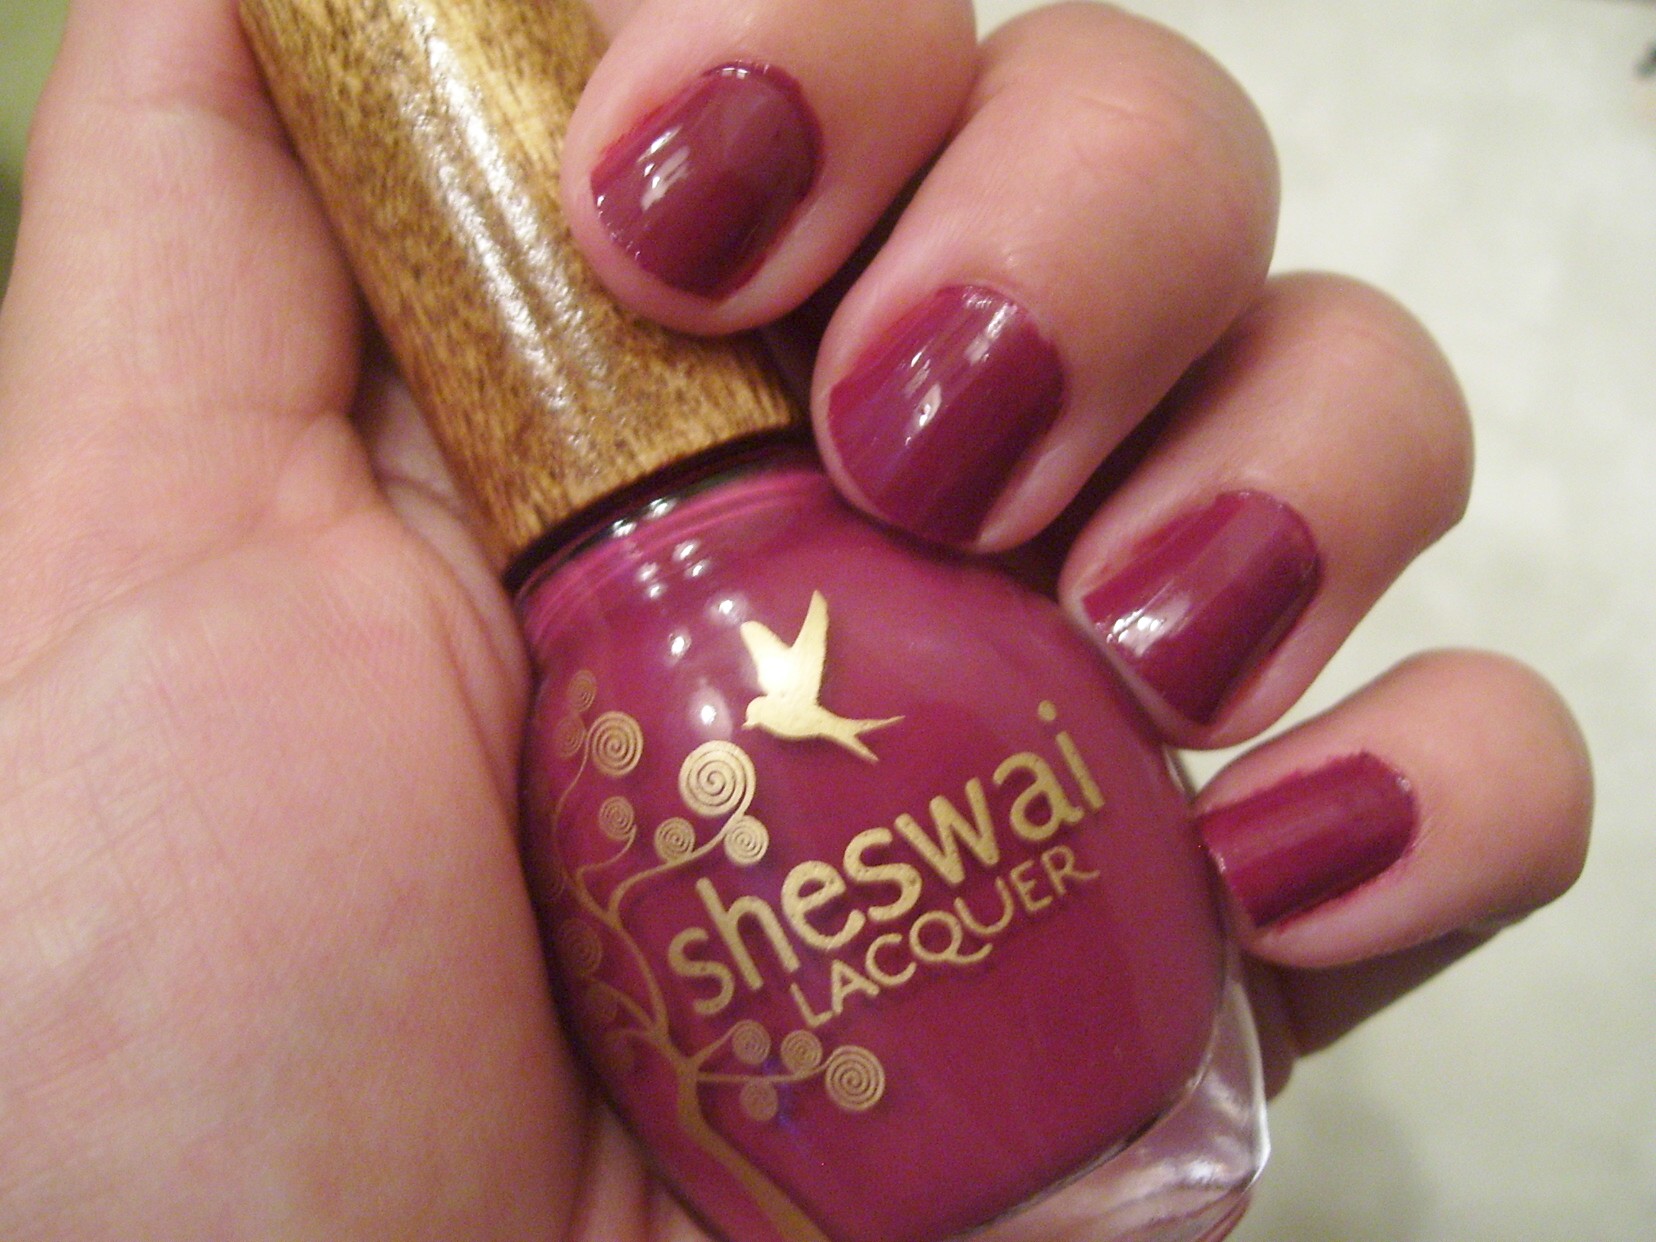 Sheswai Nail Lacquer – Totally!